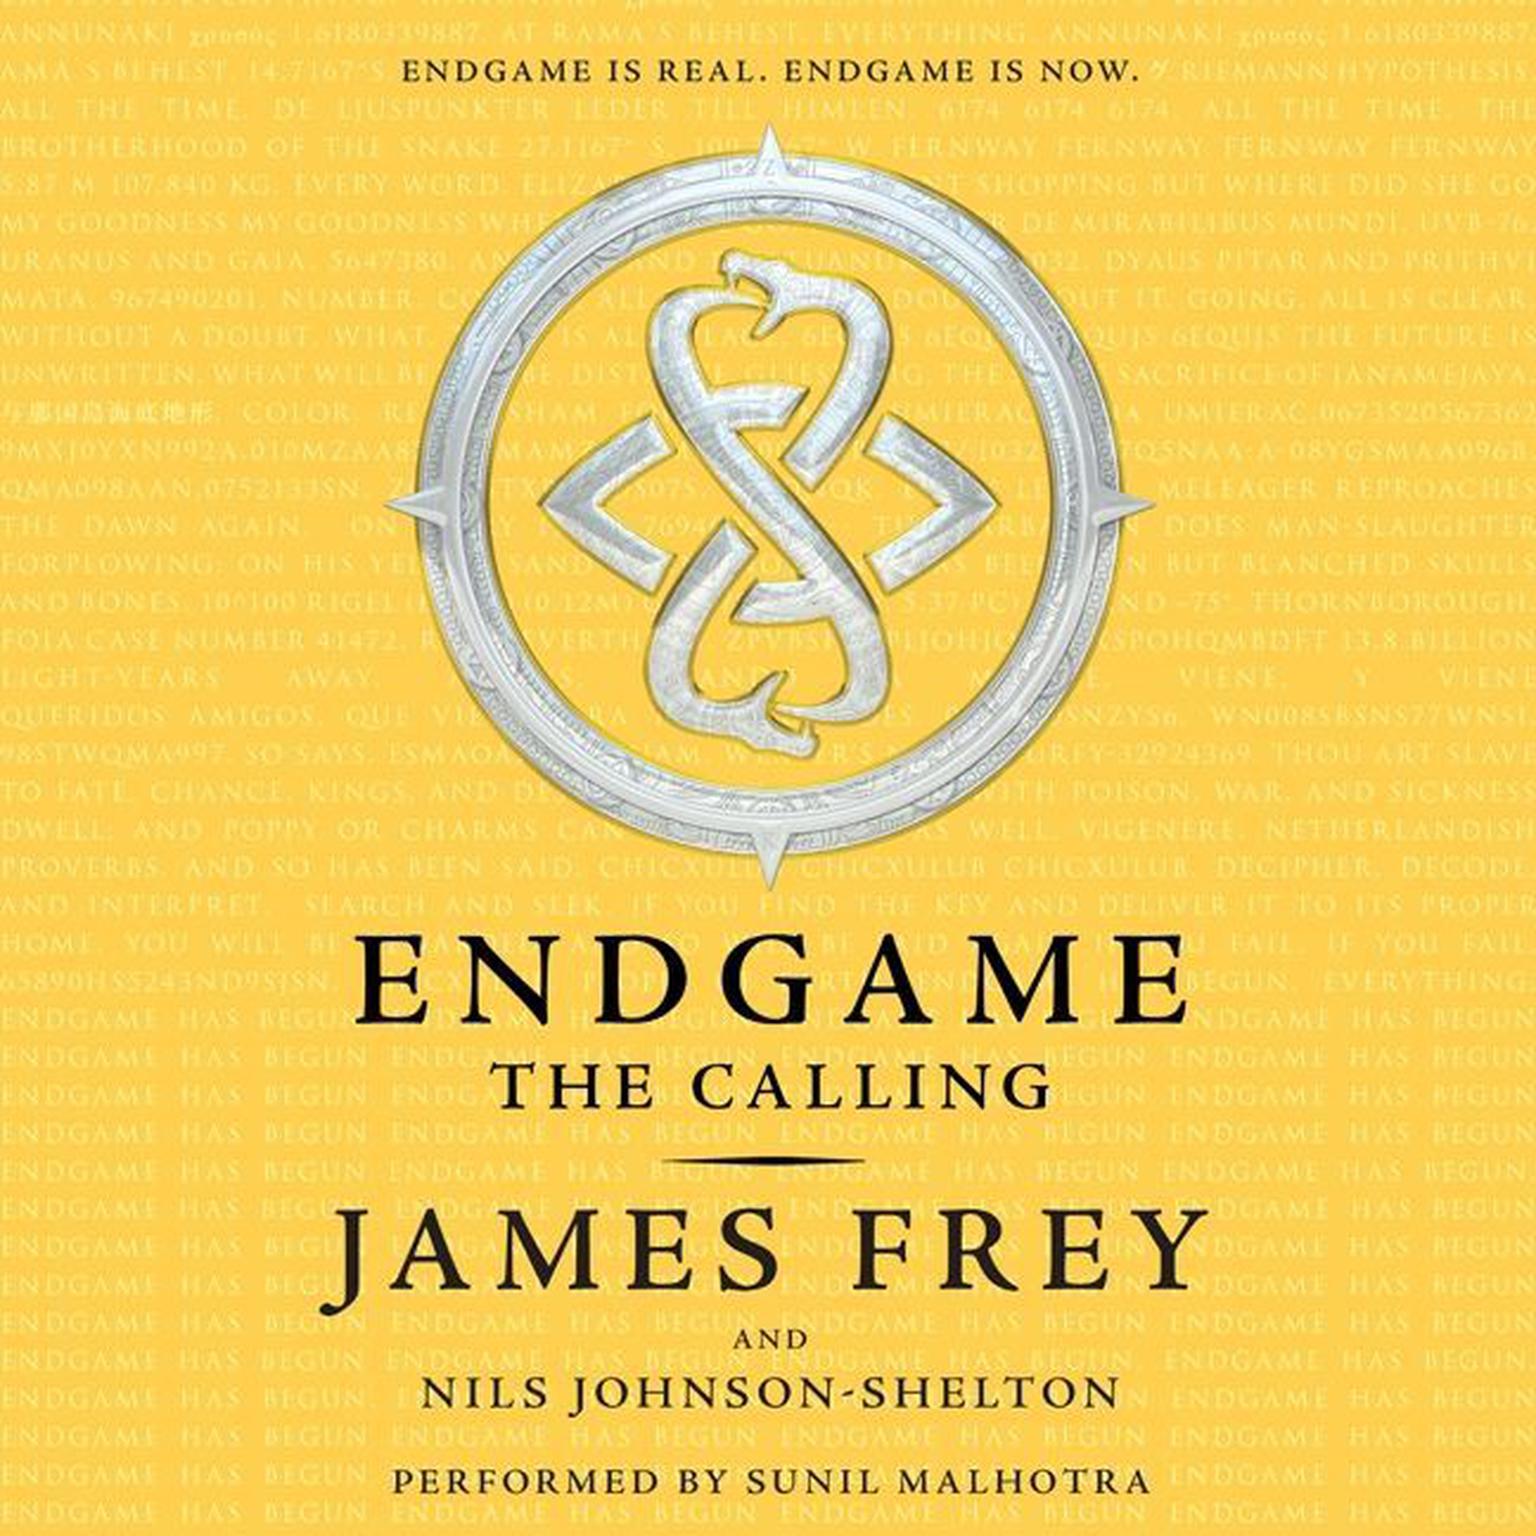 Endgame: The Calling: The Calling Audiobook, by James Frey